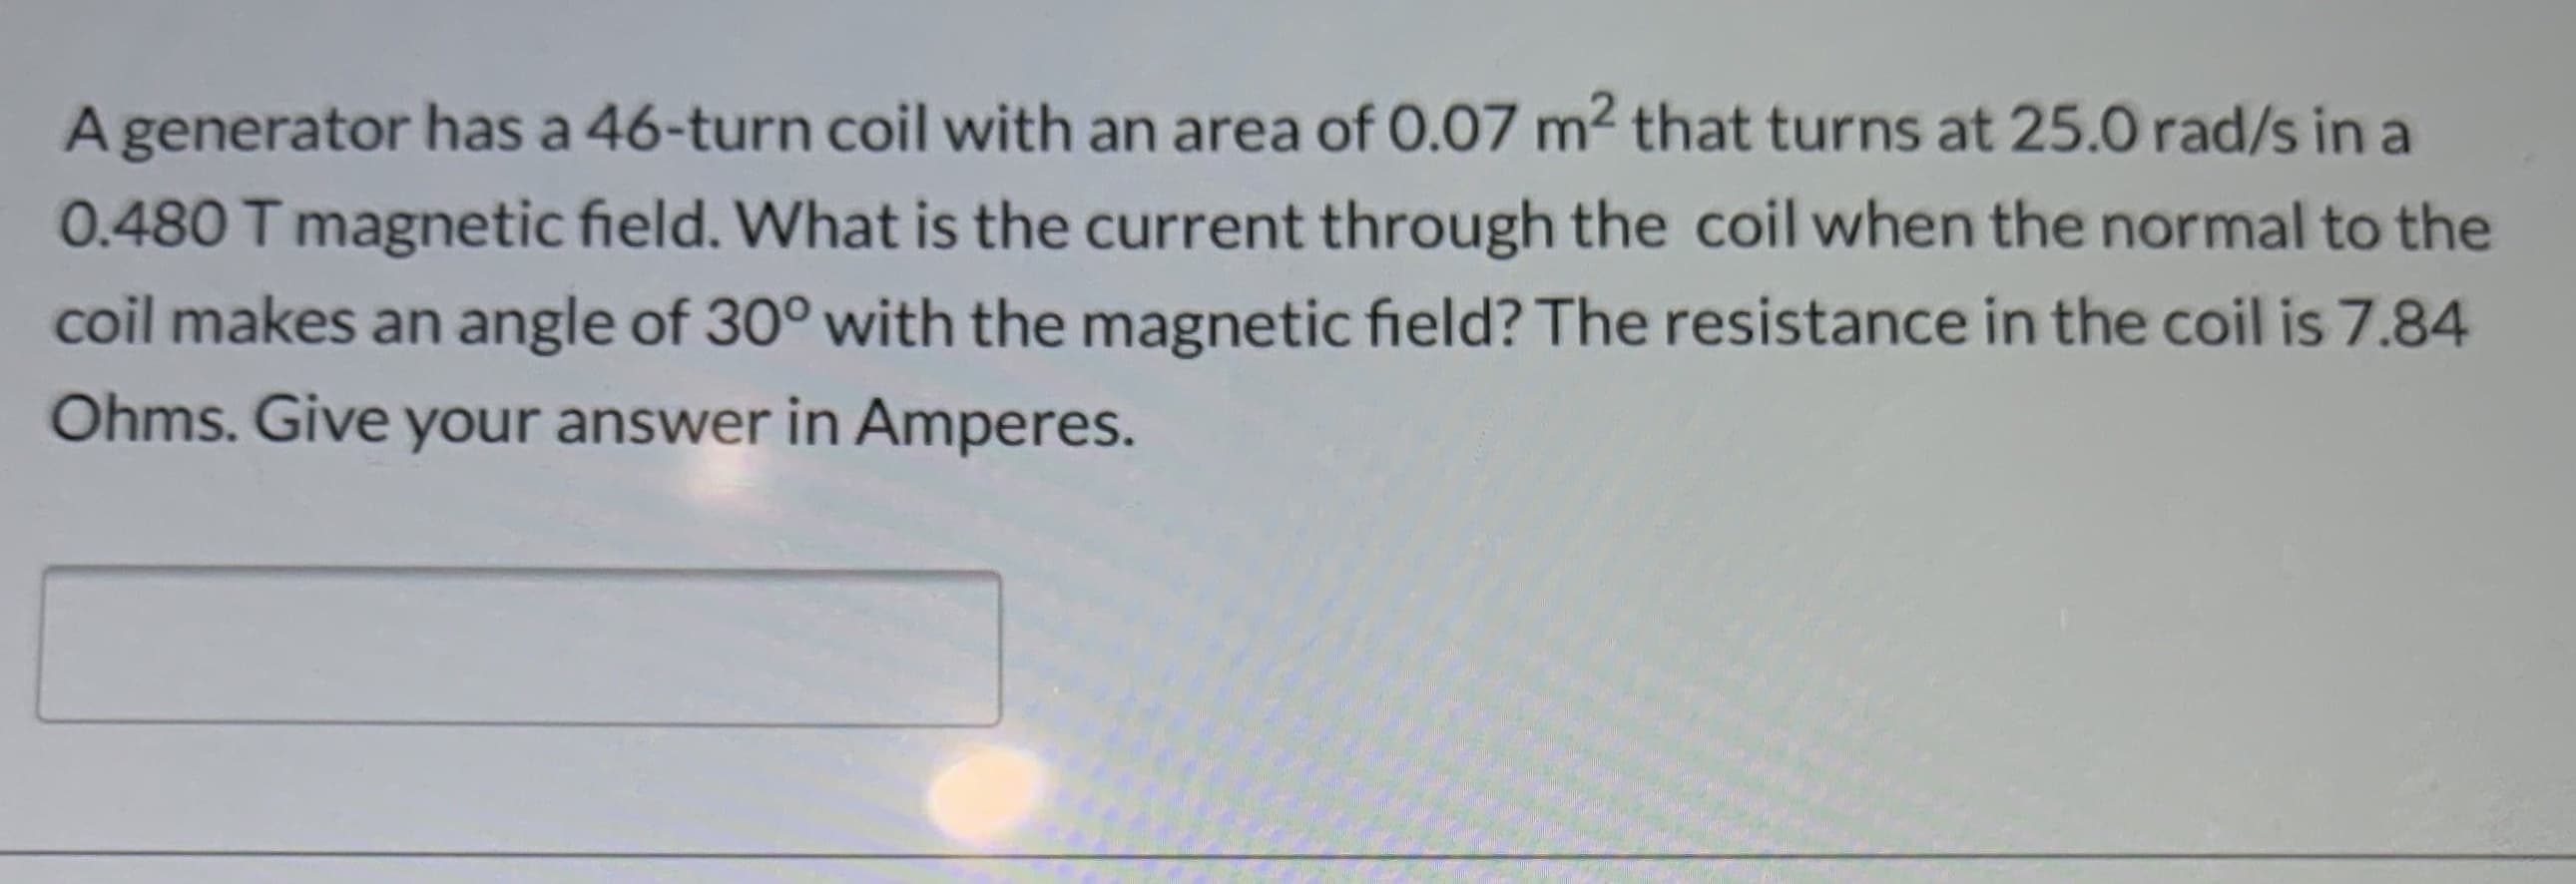 A generator has a 46-turn coil with an area of 0.07 m2 that turns at 25.0 rad/s in a
0.480 T magnetic field. What is the current through the coil when the normal to the
coil makes an angle of 30° with the magnetic field? The resistance in the coil is 7.84
Ohms. Give your answer in Amperes.
